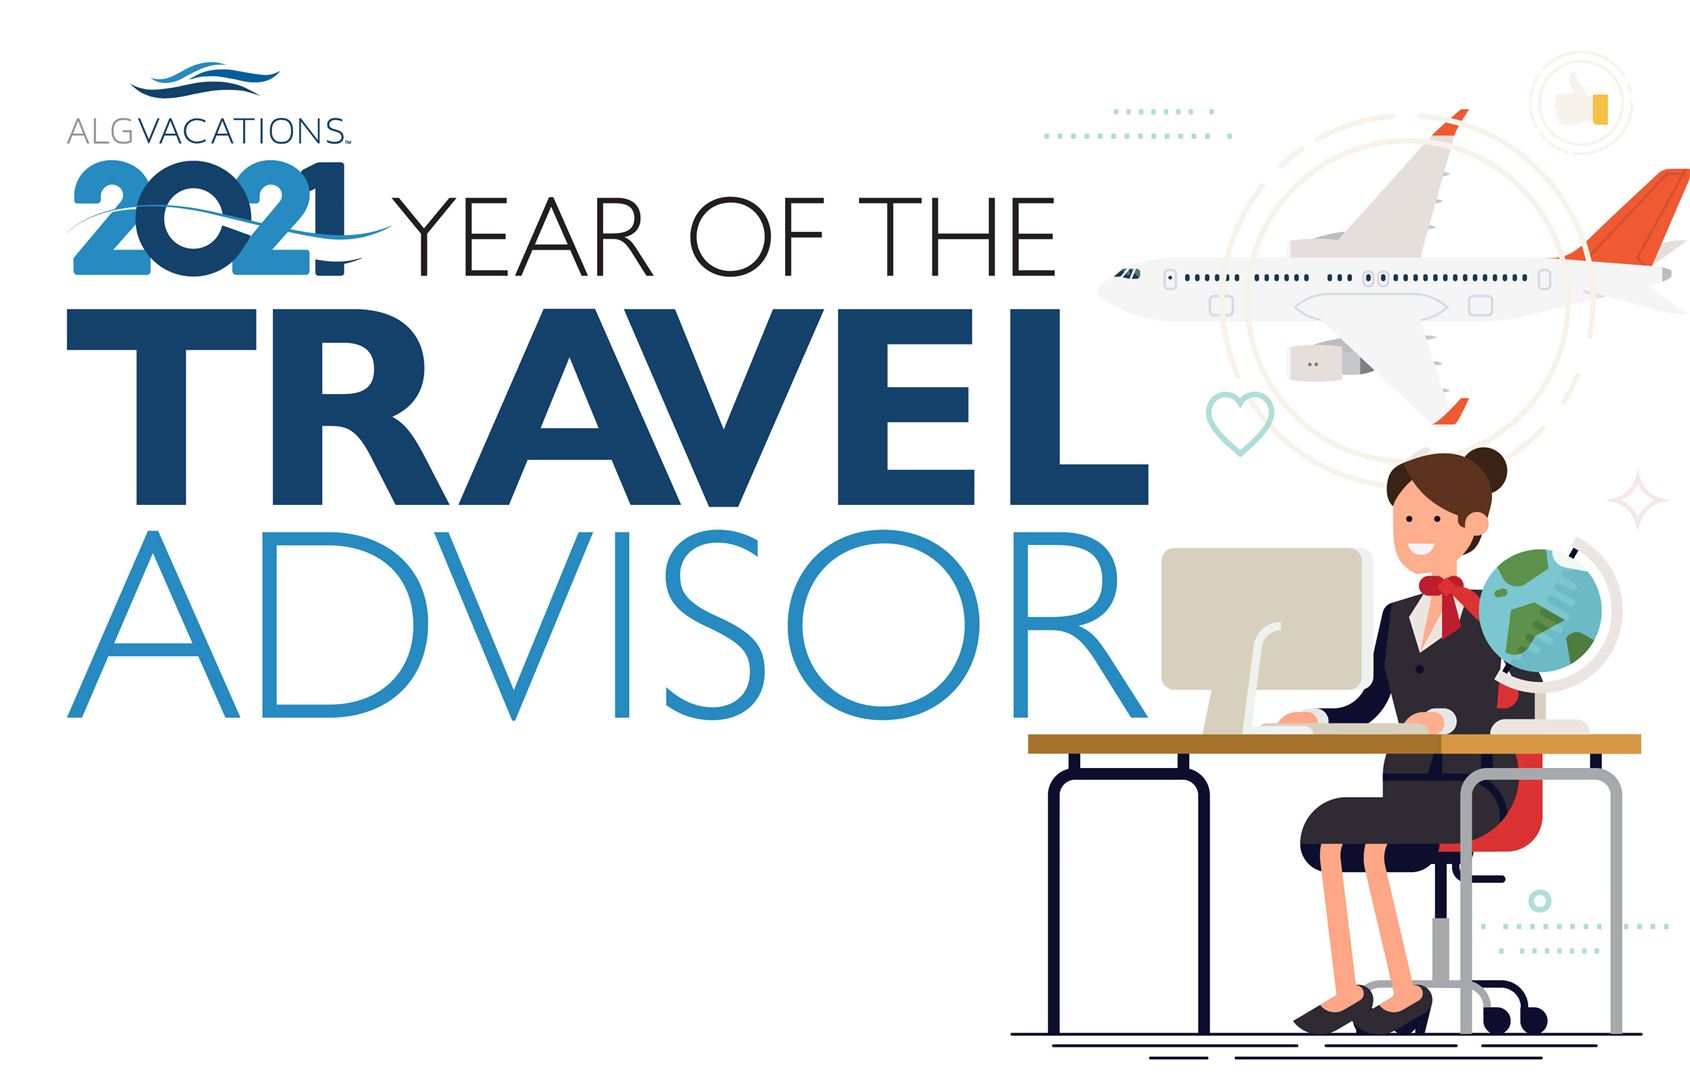 Apple Leisure Group Vacations Proclaims 2021 the ‘Year of the Travel Advisor’